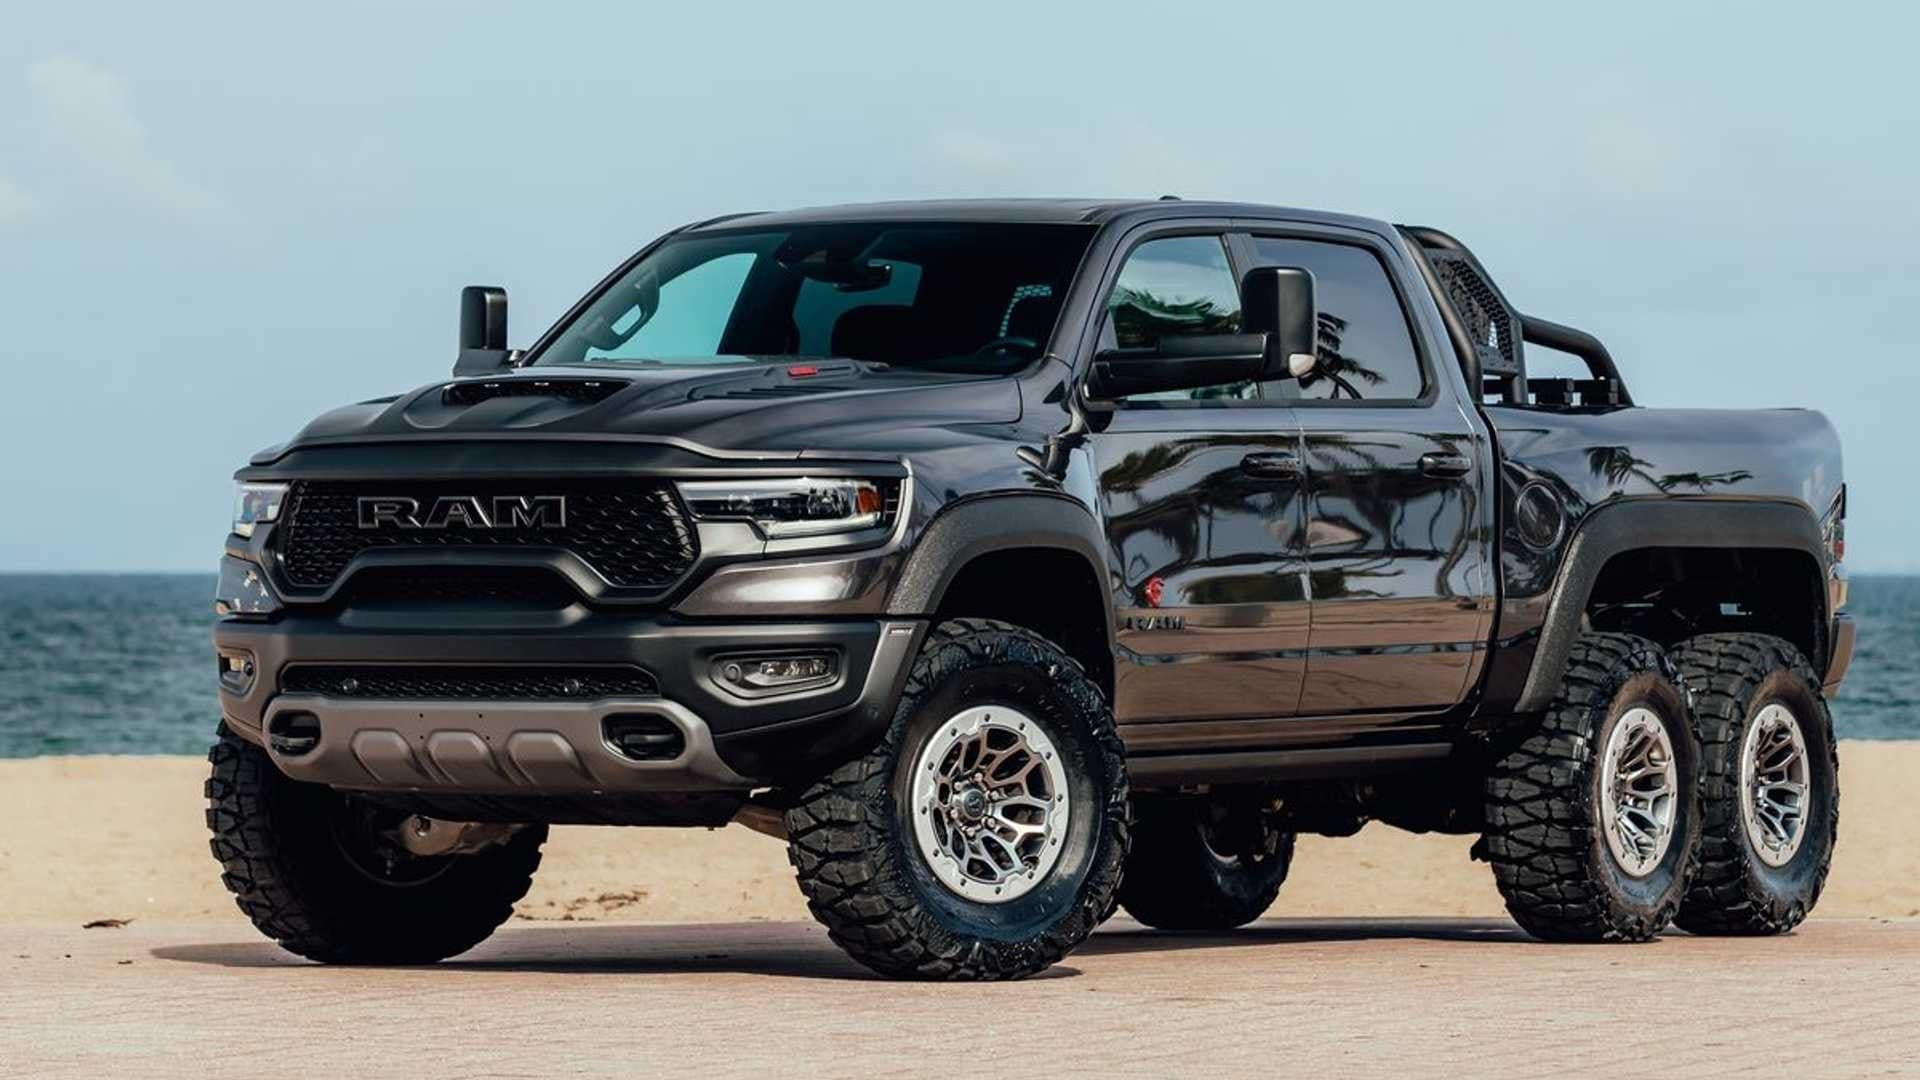 6×6 Ram TRX With 37-Inch Tires and 702 HP Sounds Like a Lot of Math